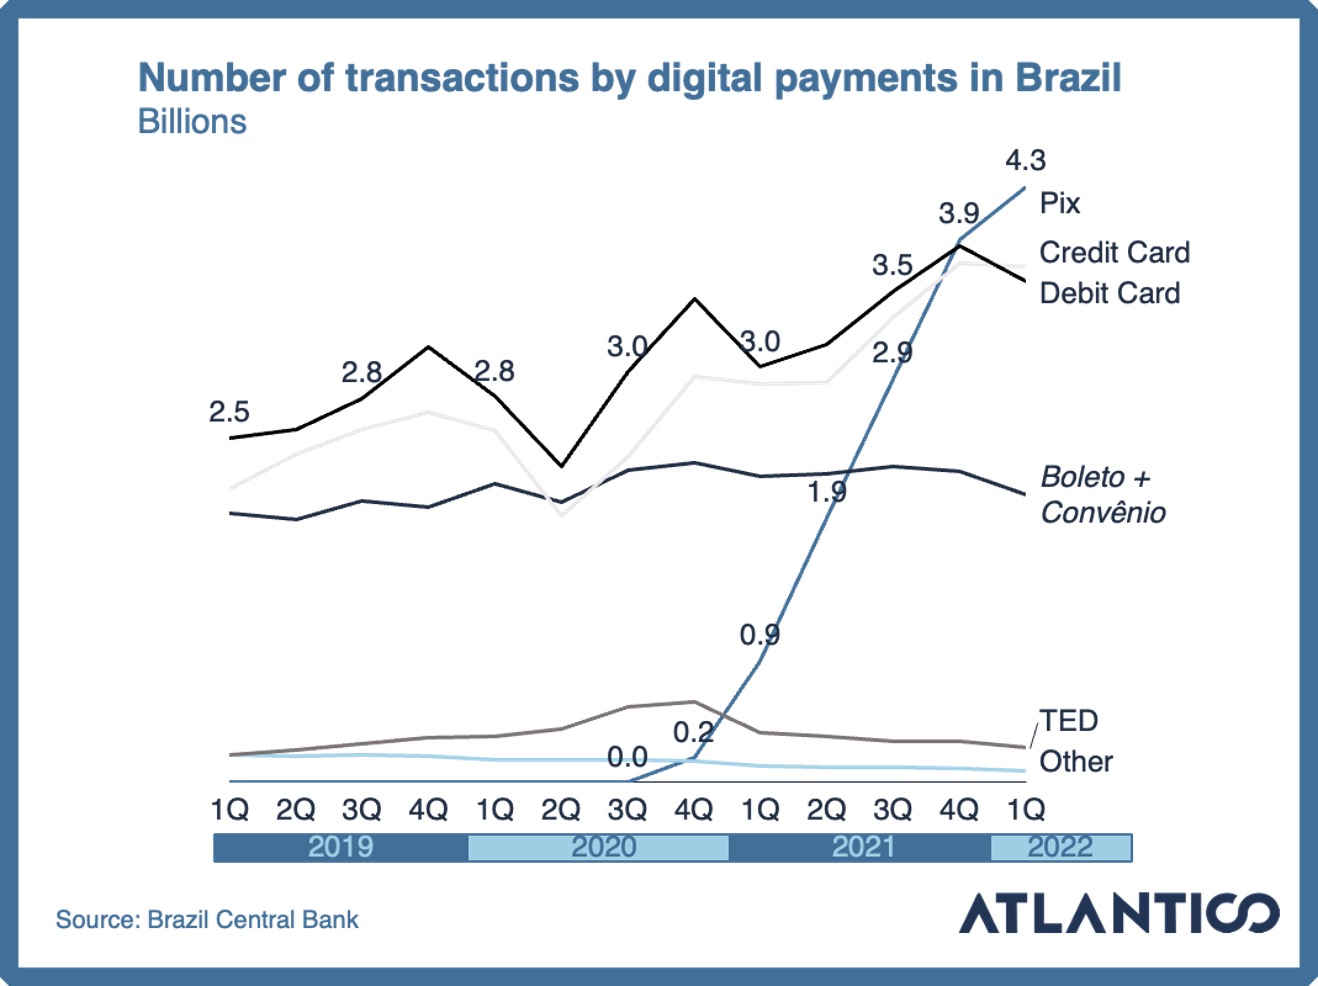 Number of transactions by digital payment method in Brazil.